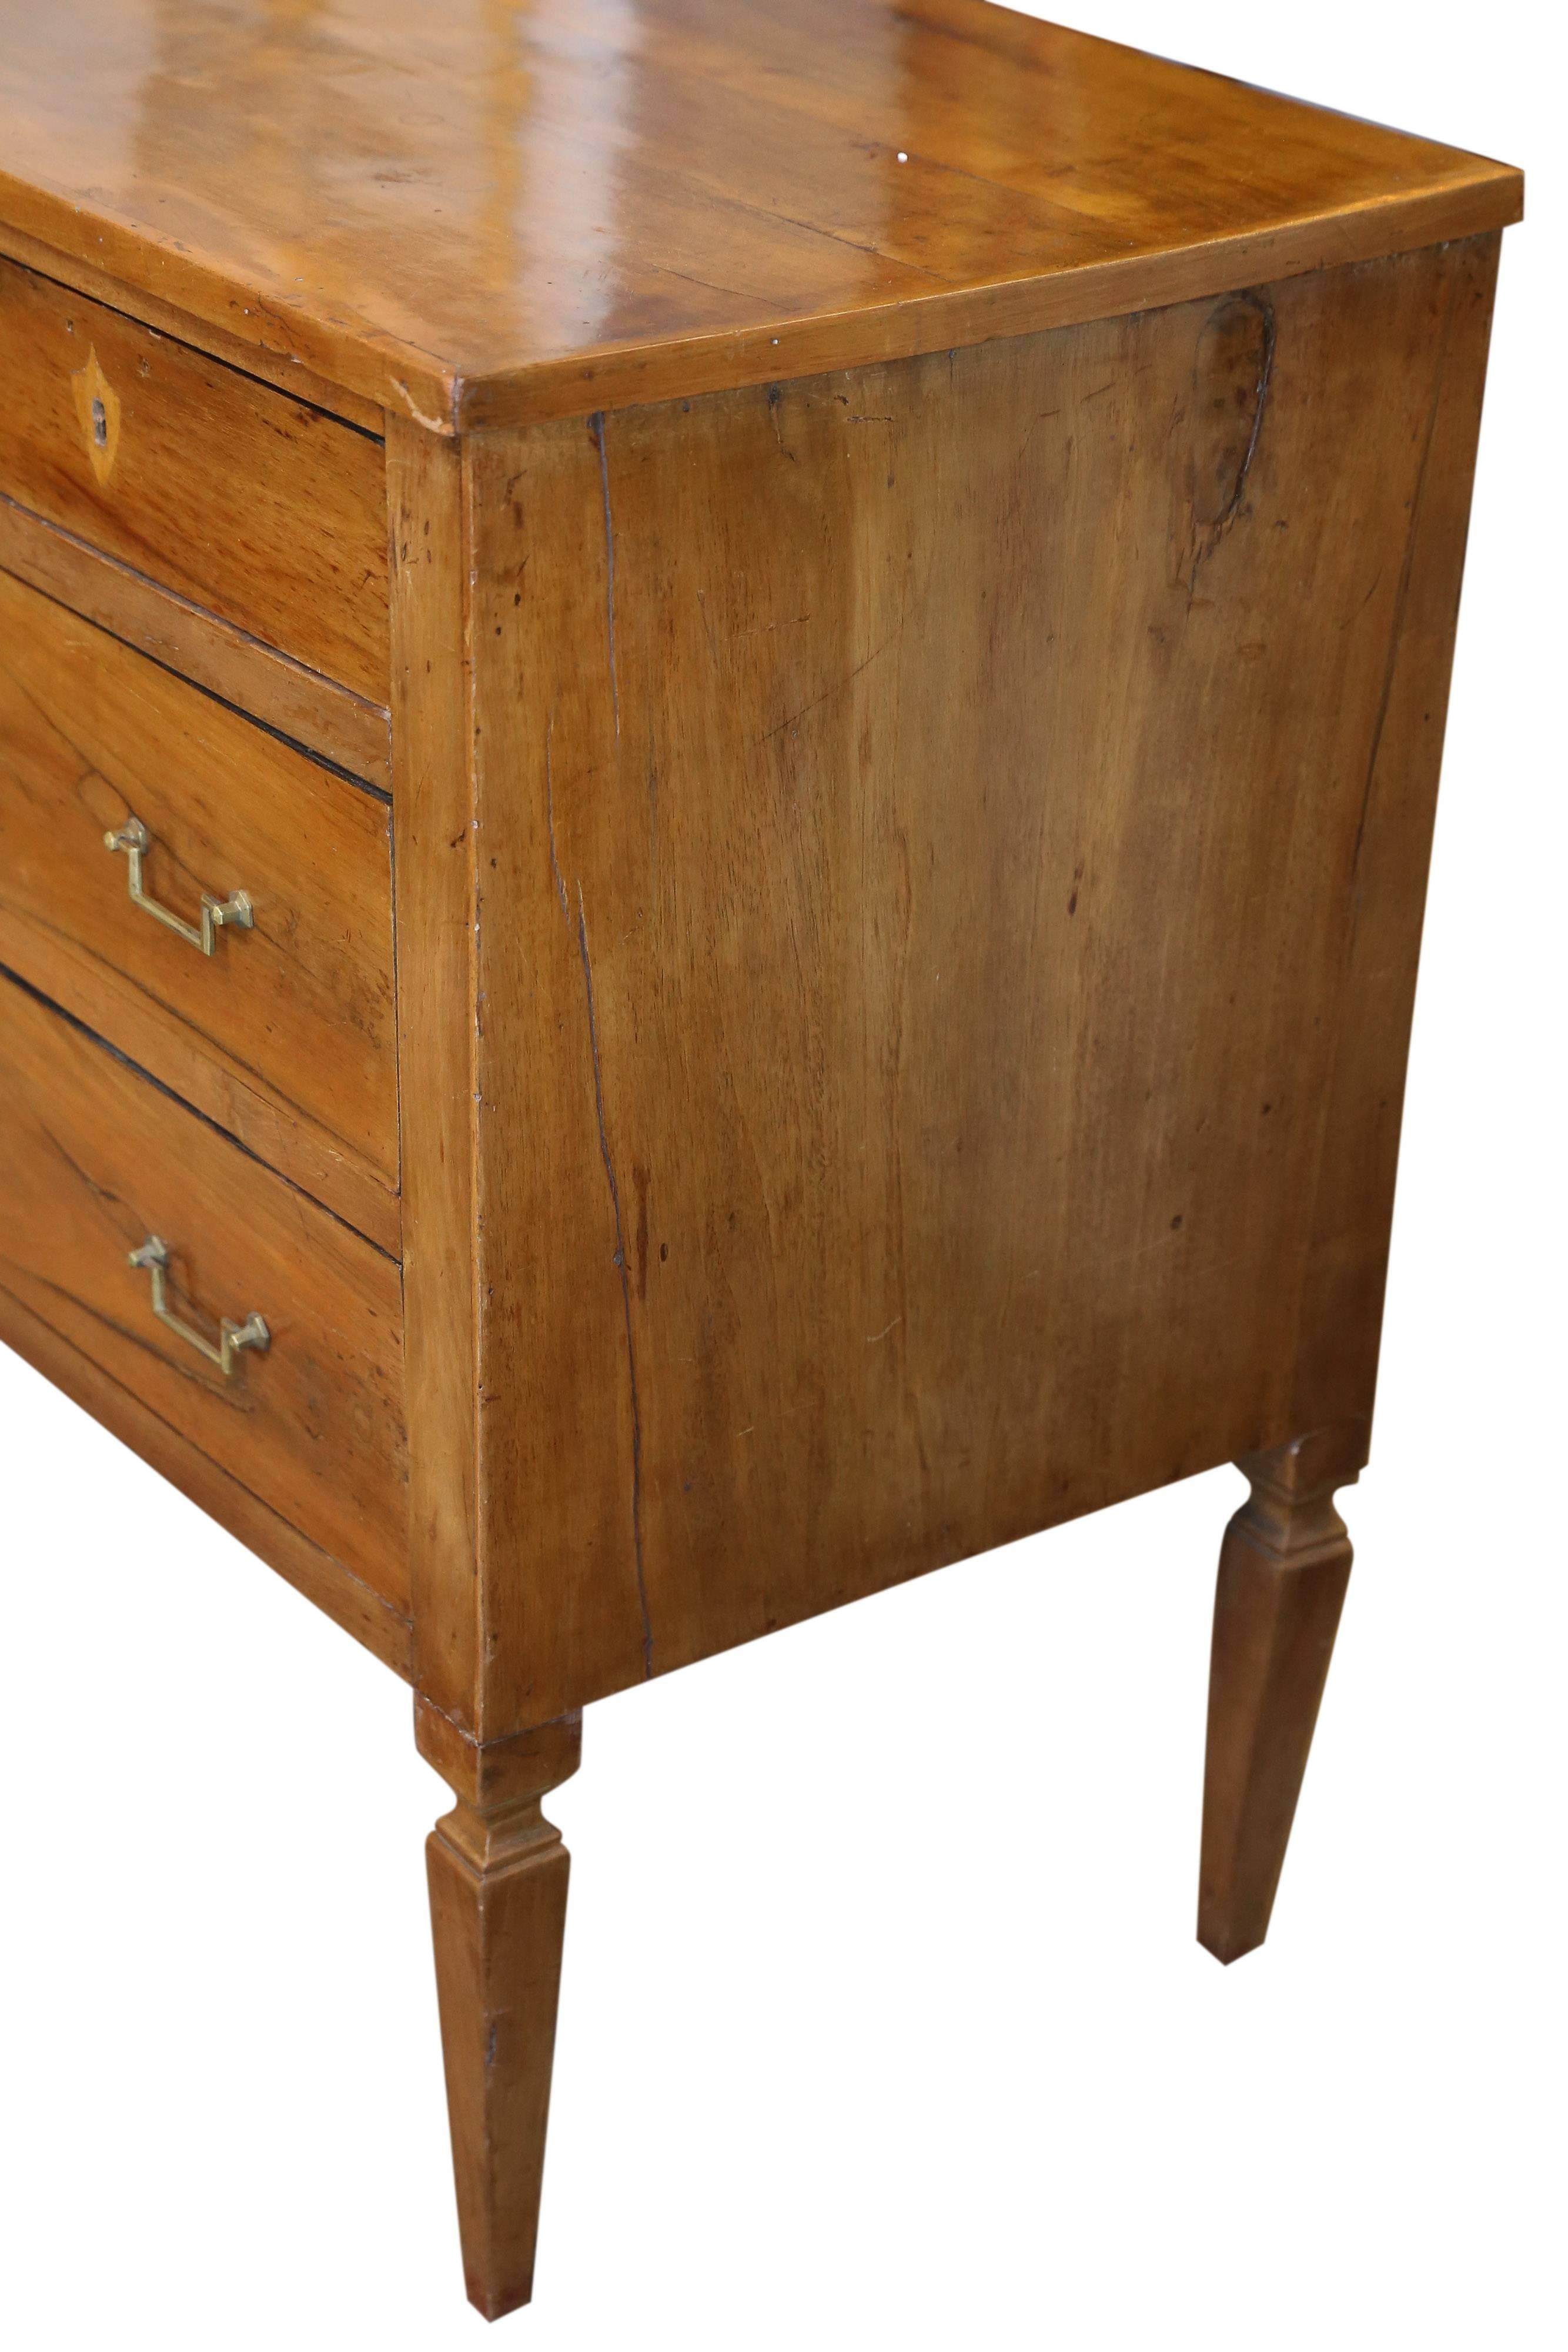 Clean lines and the beauty of walnut patina make this a very handsome chest.